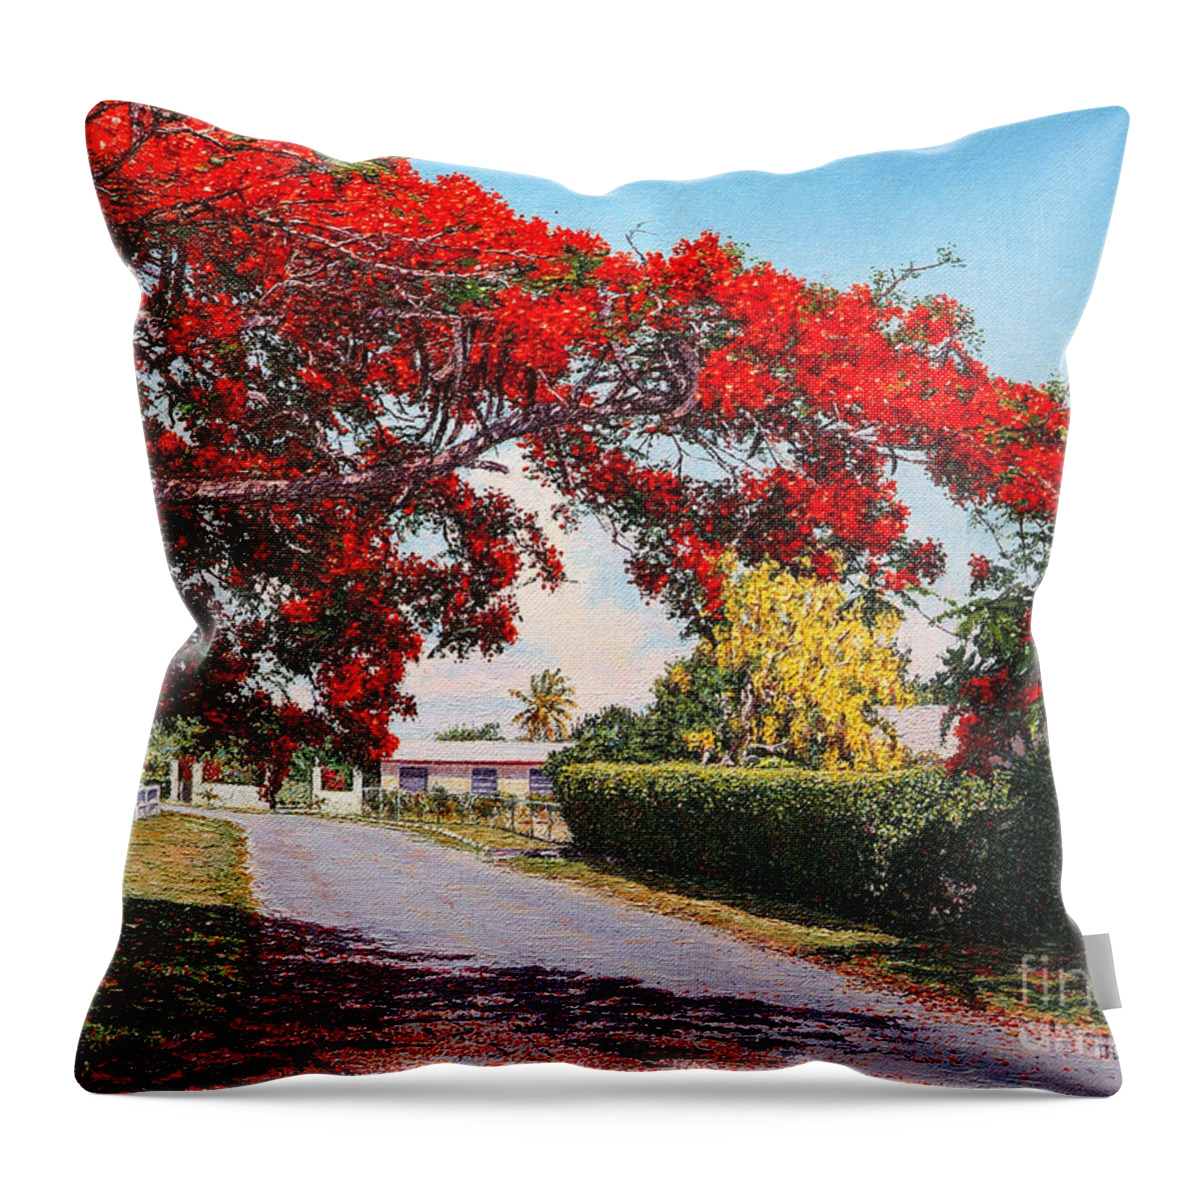 Eddie Throw Pillow featuring the painting Poinciana Shadows by Eddie Minnis